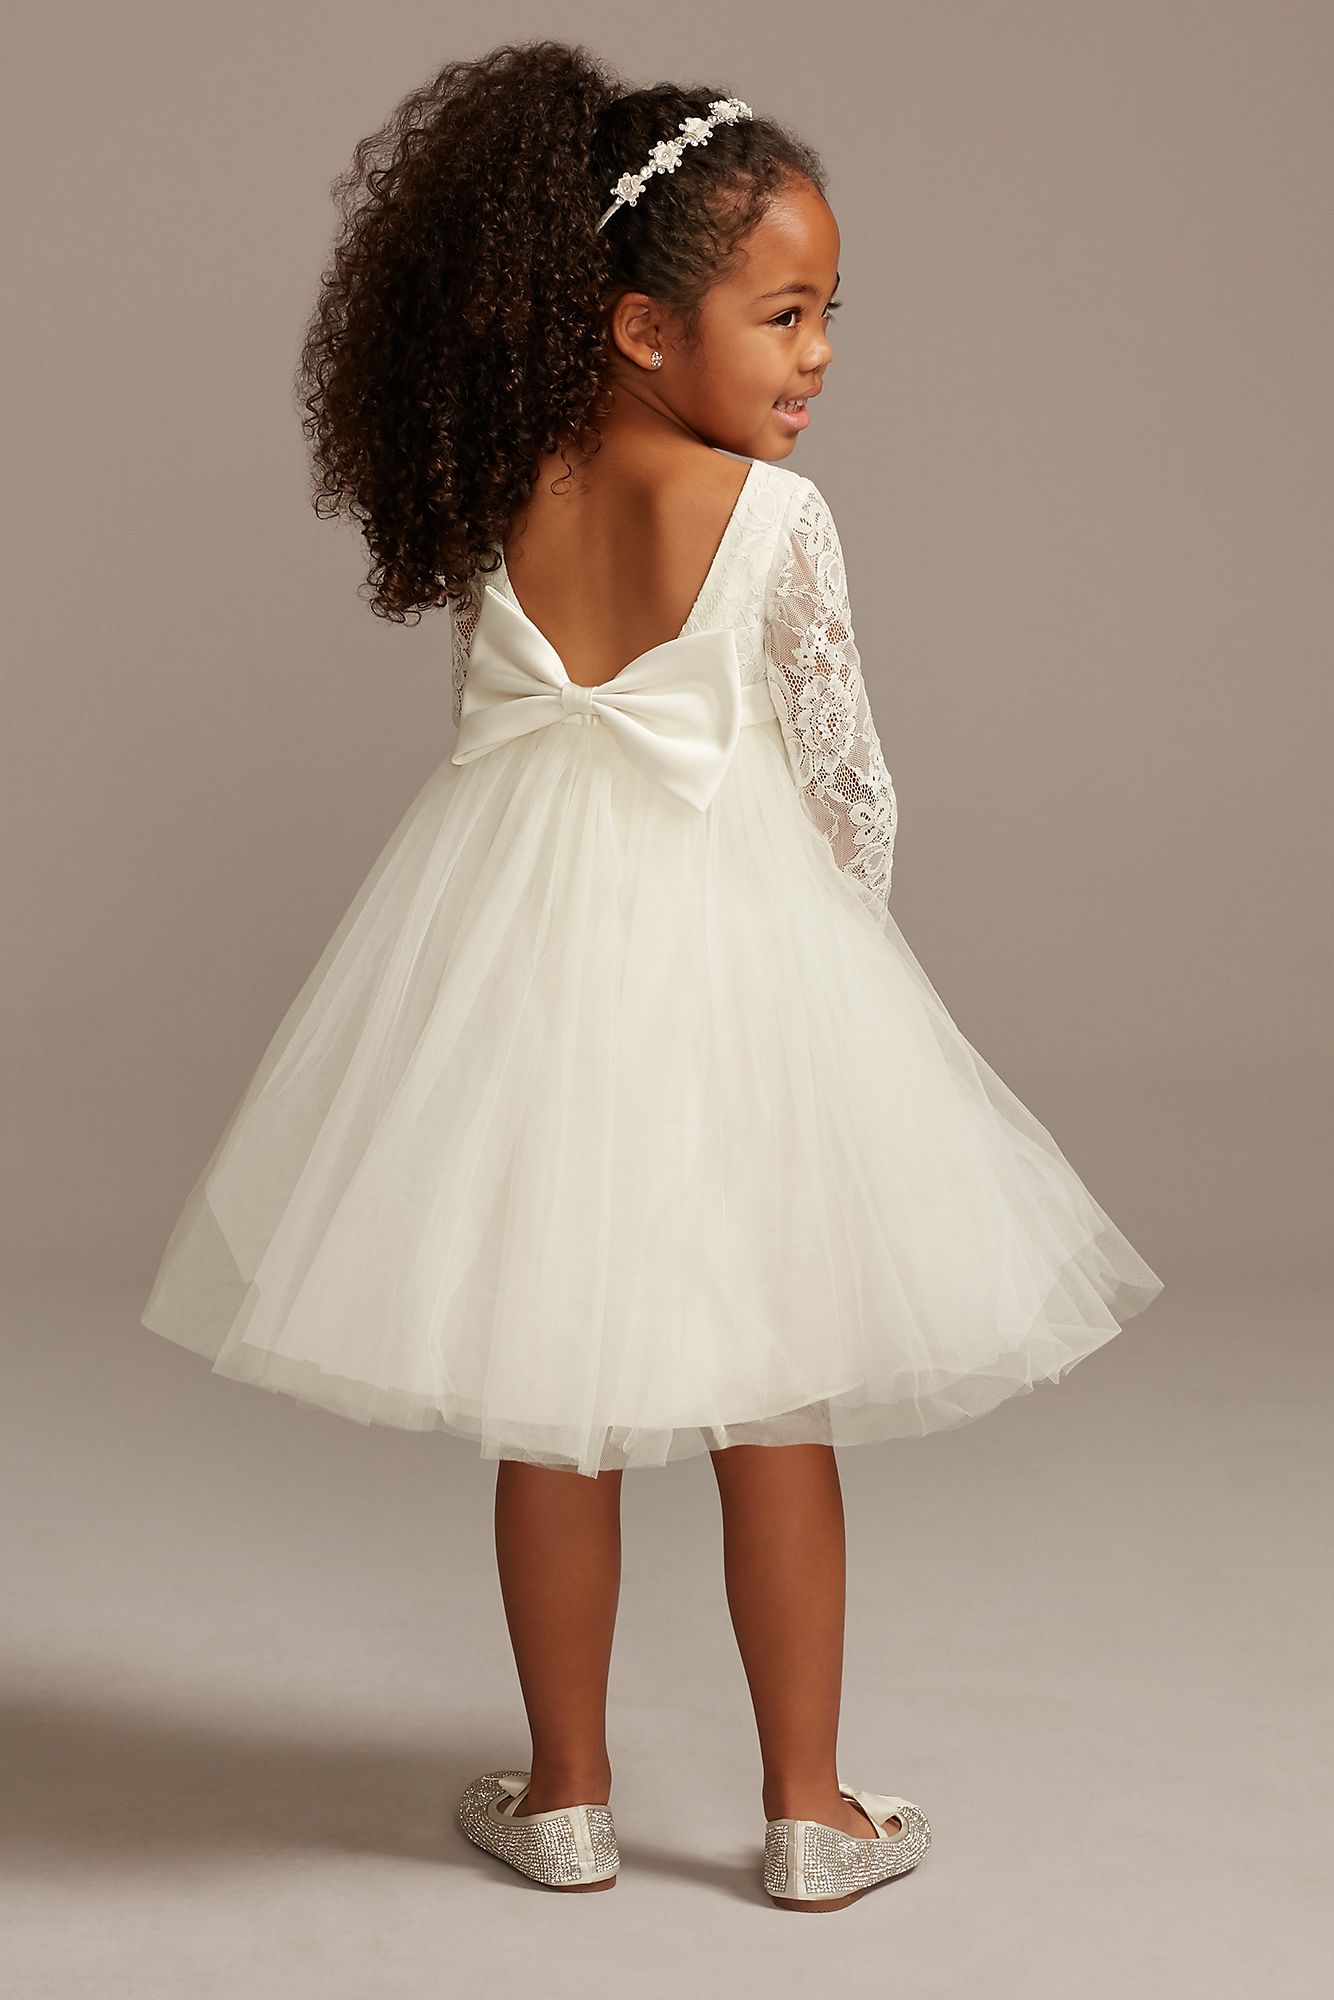 Long Illusion Lace Sleeves OP272 Flower Girl Dress with Bow